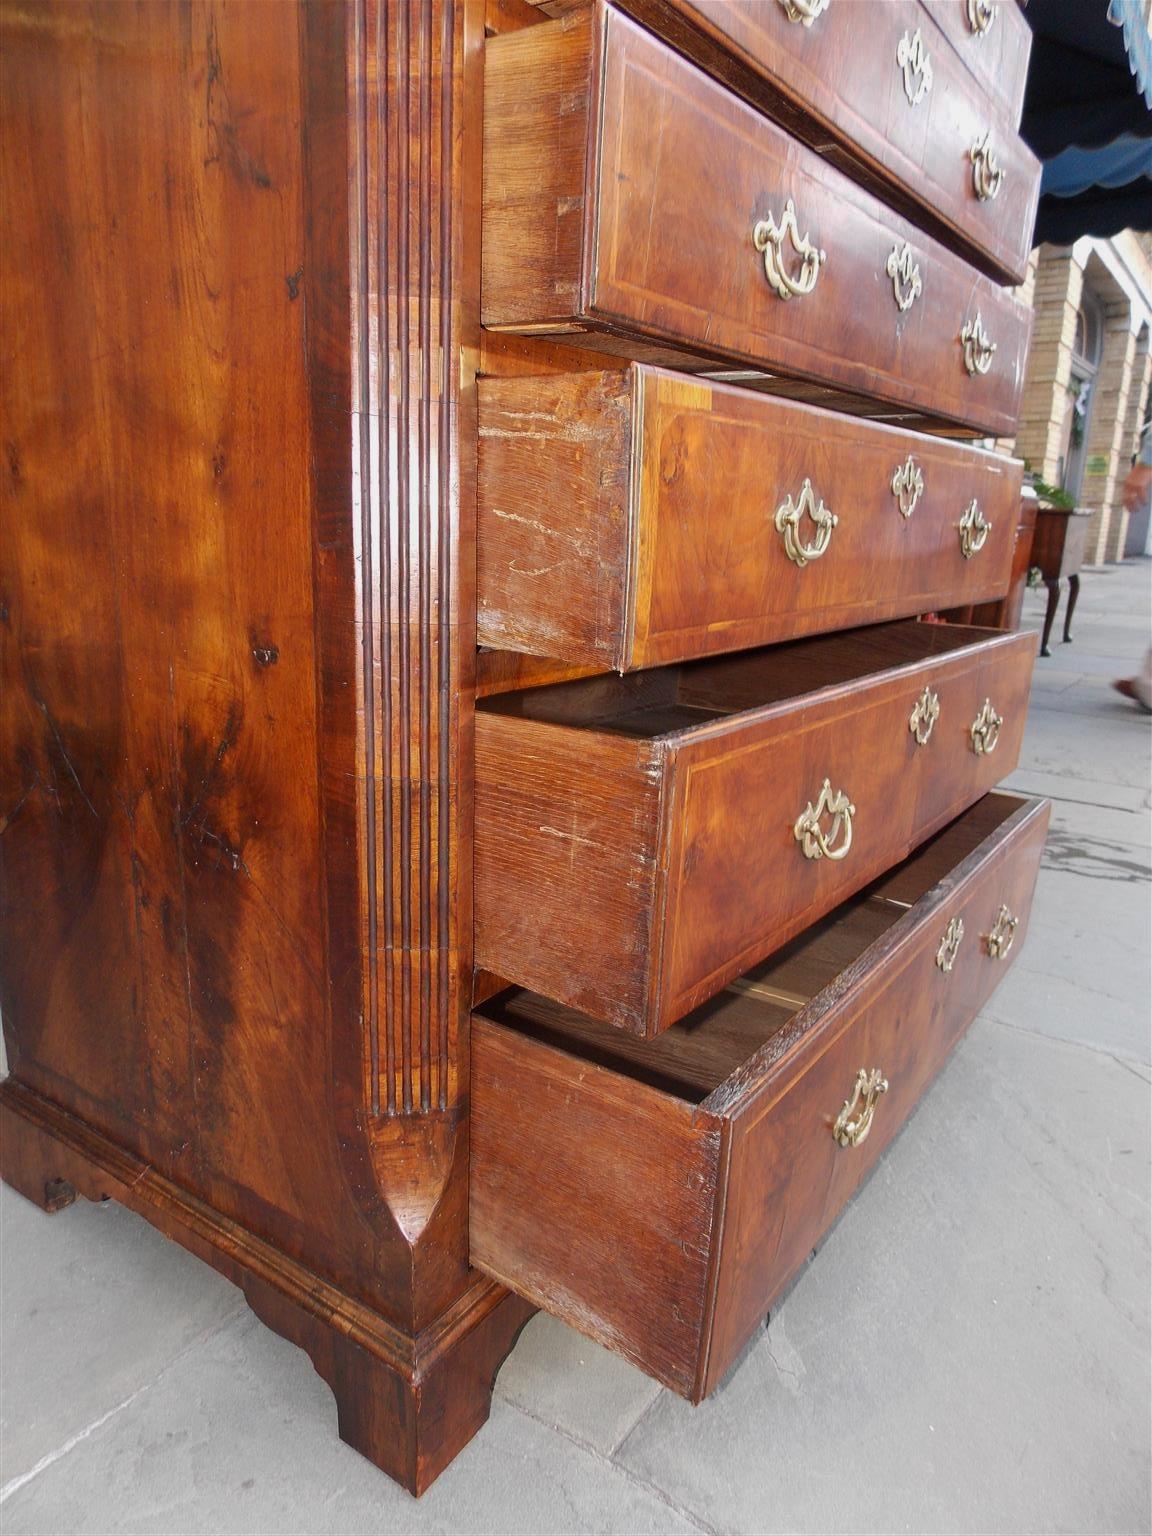 English Chippendale Burl Walnut Tall Chest with Hearing Bone Inlays, Circa 1740 For Sale 5